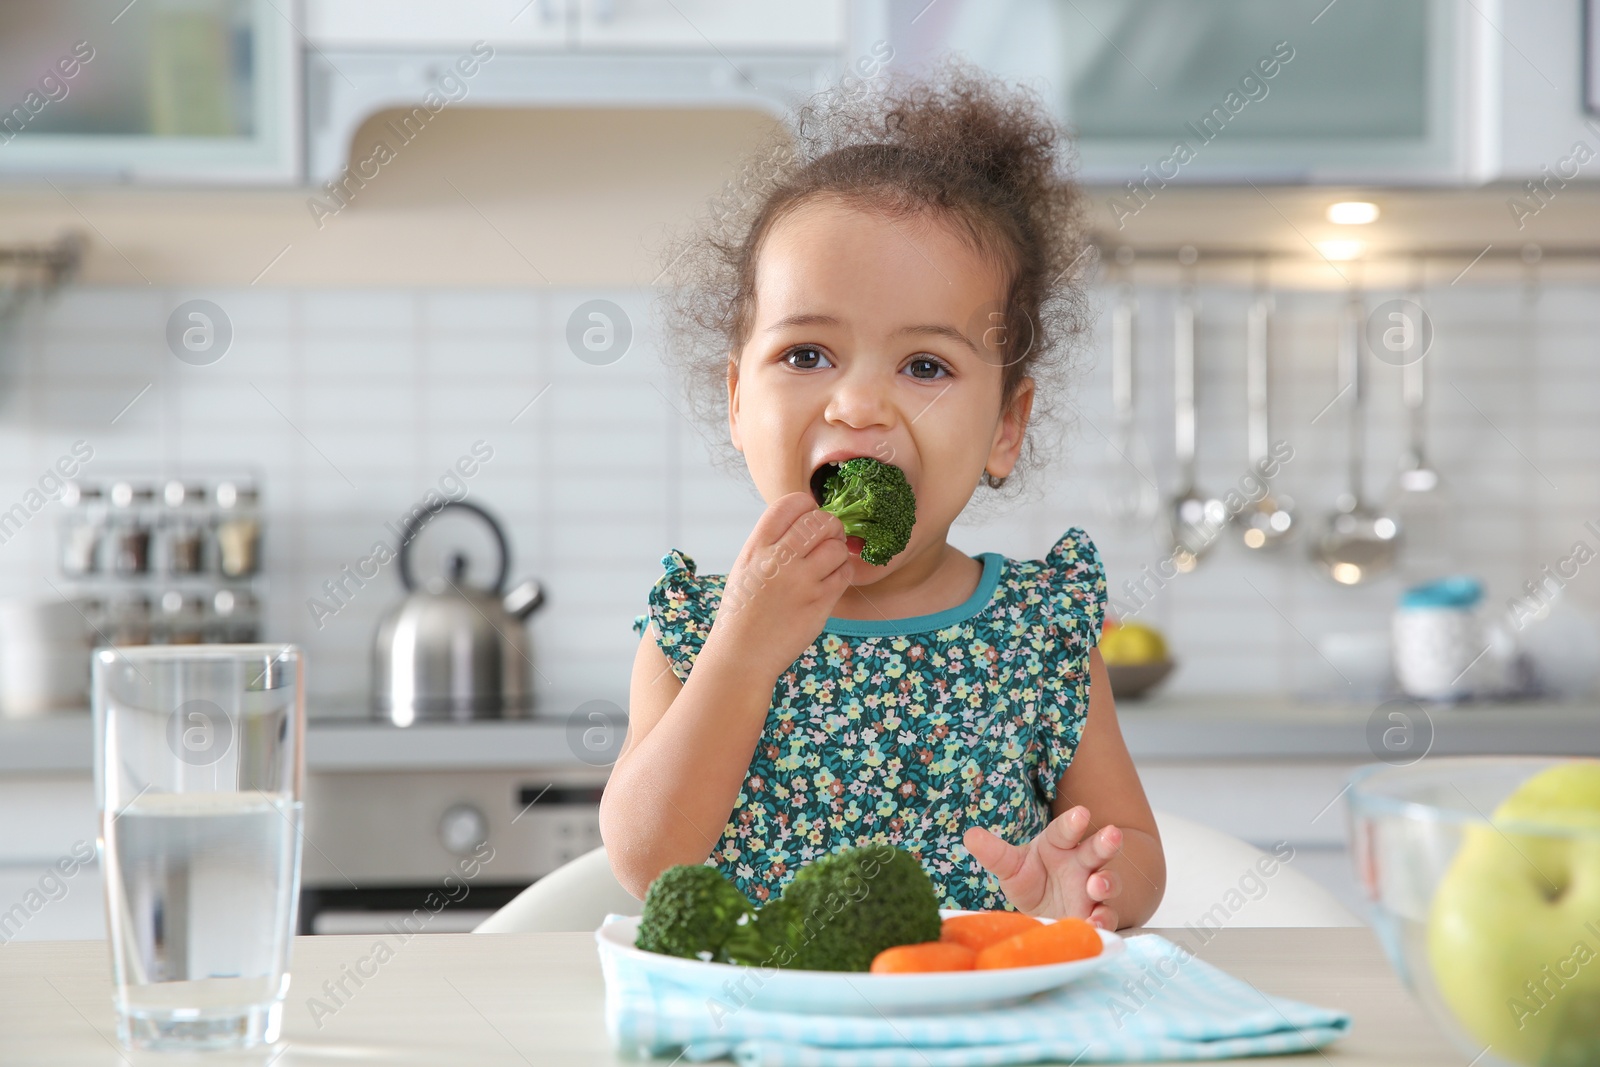 Photo of Cute African-American girl eating vegetables at table in kitchen